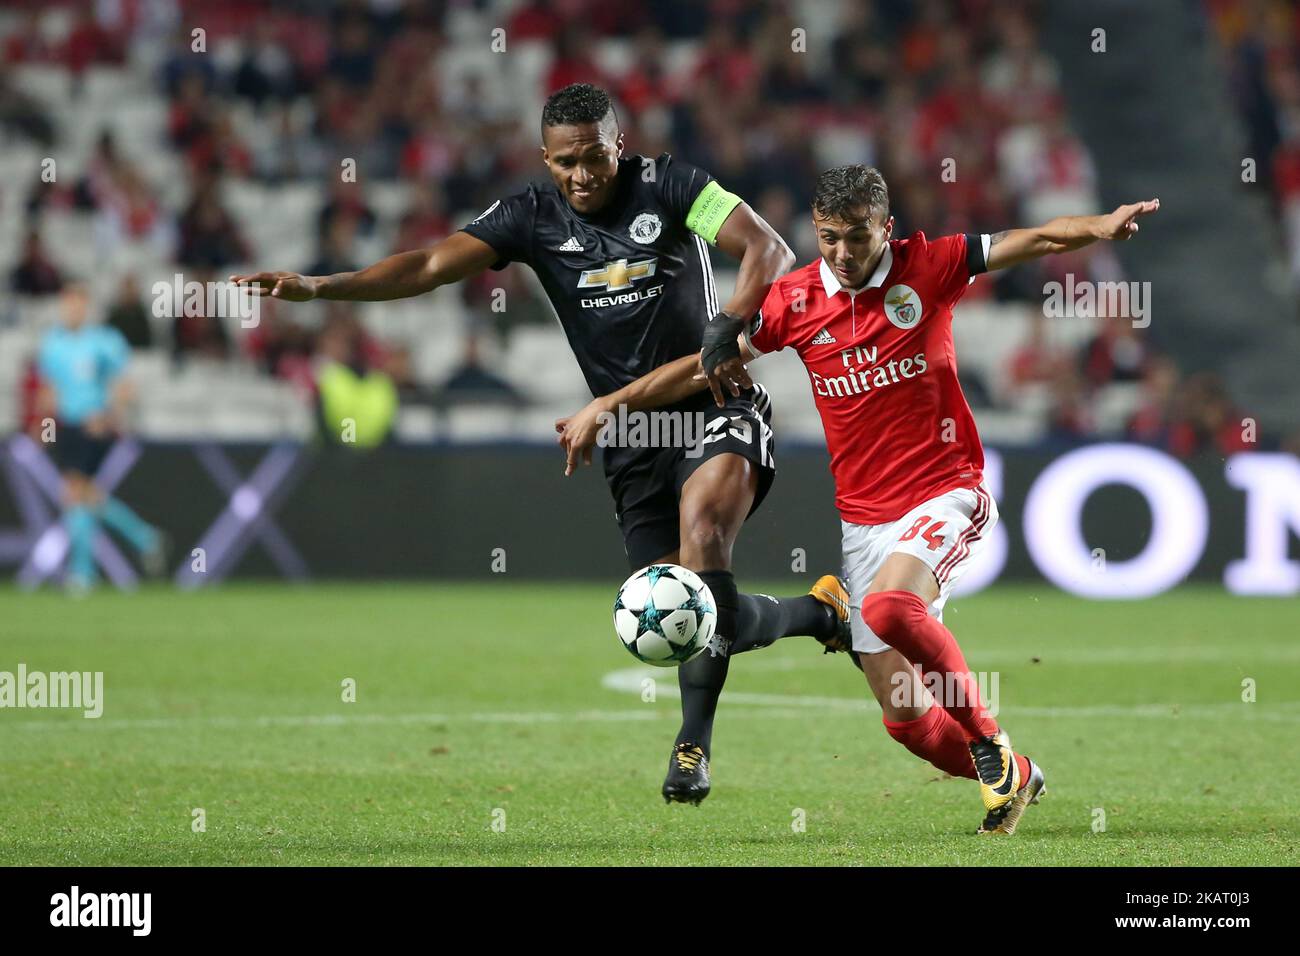 Manchester United's Ecuadorian defender Antonio Valencia (R ) fights for the ball with Benfica's Portuguese midfielder Diogo Goncalves during the UEFA Champions League football match SL Benfica vs Manchester United at the Luz stadium in Lisbon, Portugal on October 18, 2017. ( Photo by Pedro FiÃºza/NurPhoto) Stock Photo